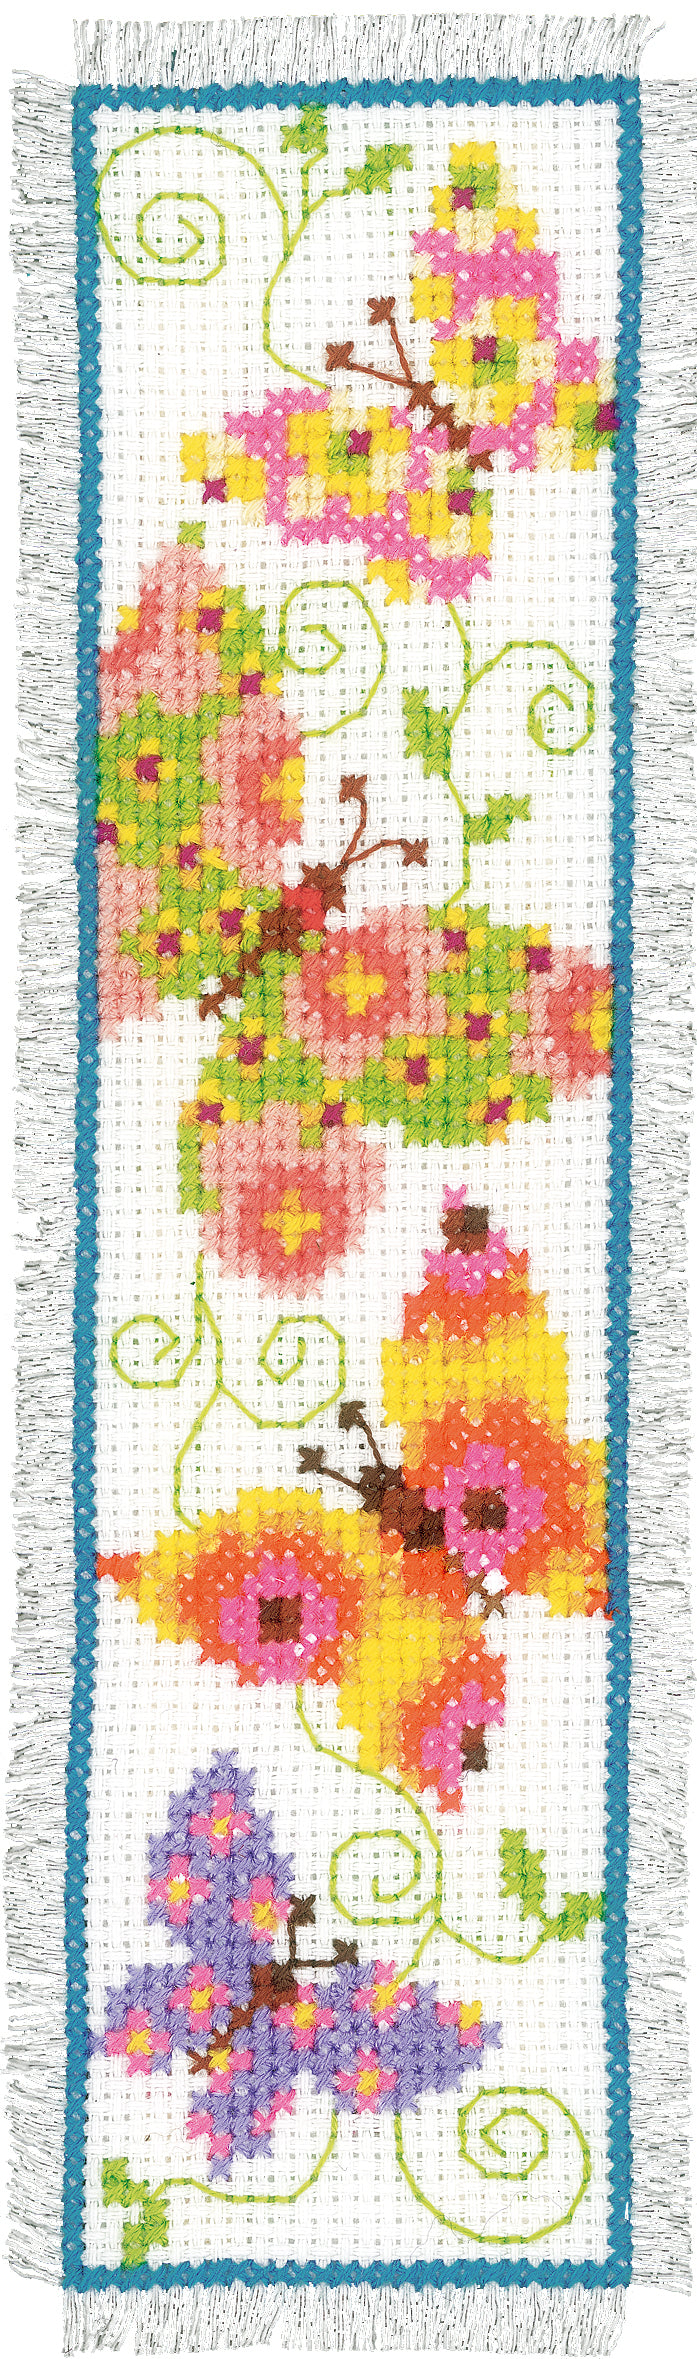 Counted Cross Stitch Kit: Bookmark: Butterflies I